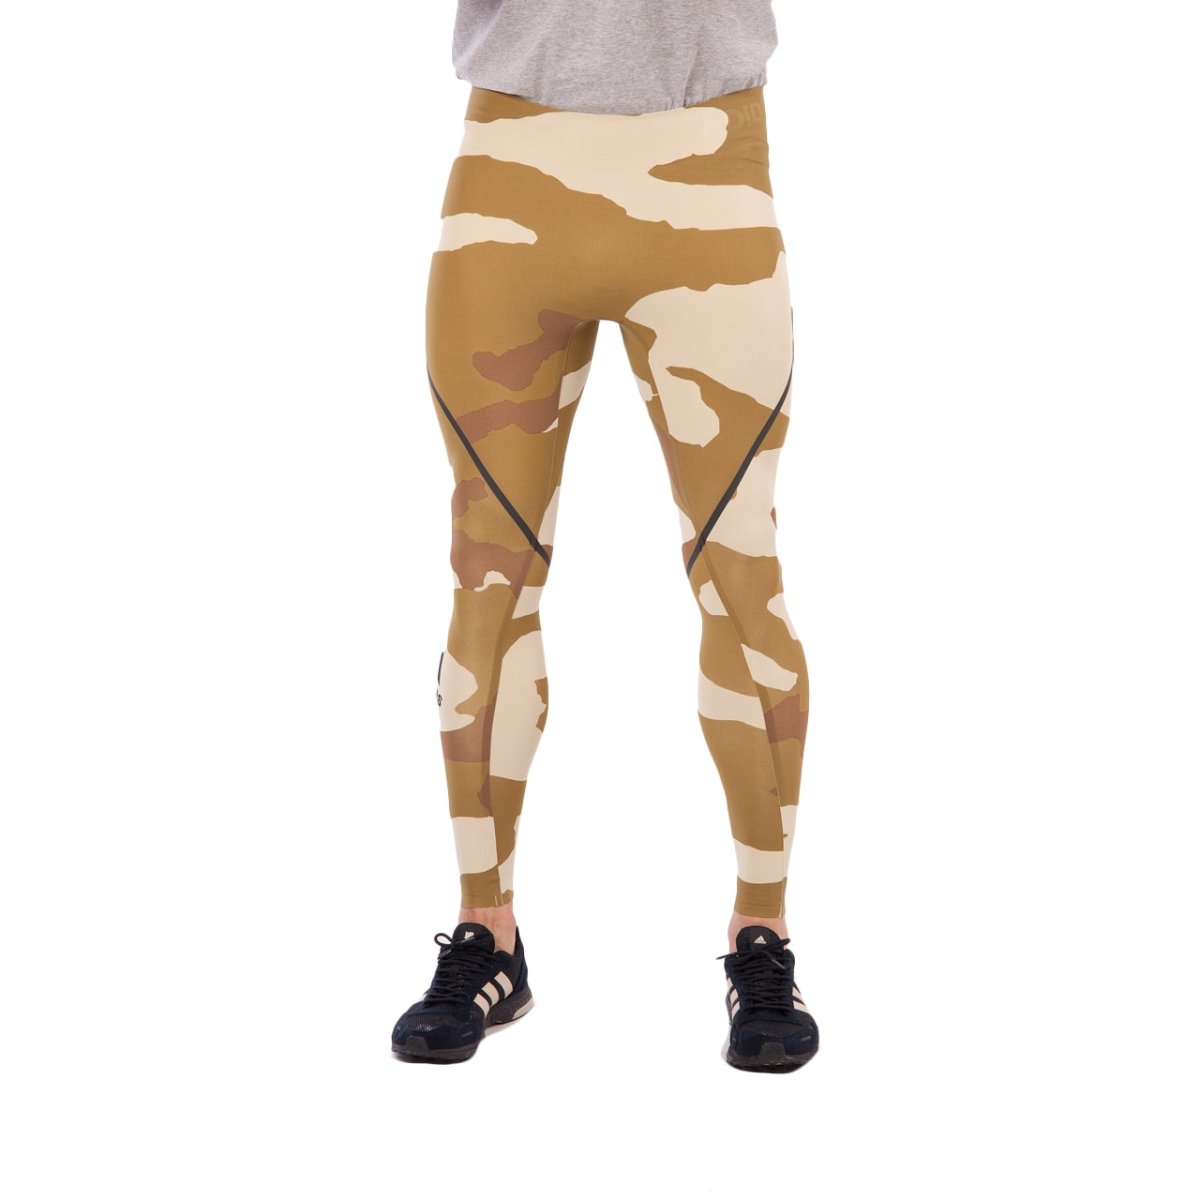 UNDEFEATED x adidas ASK 360 Tights 1/1 (Camouflage)  - Allike Store